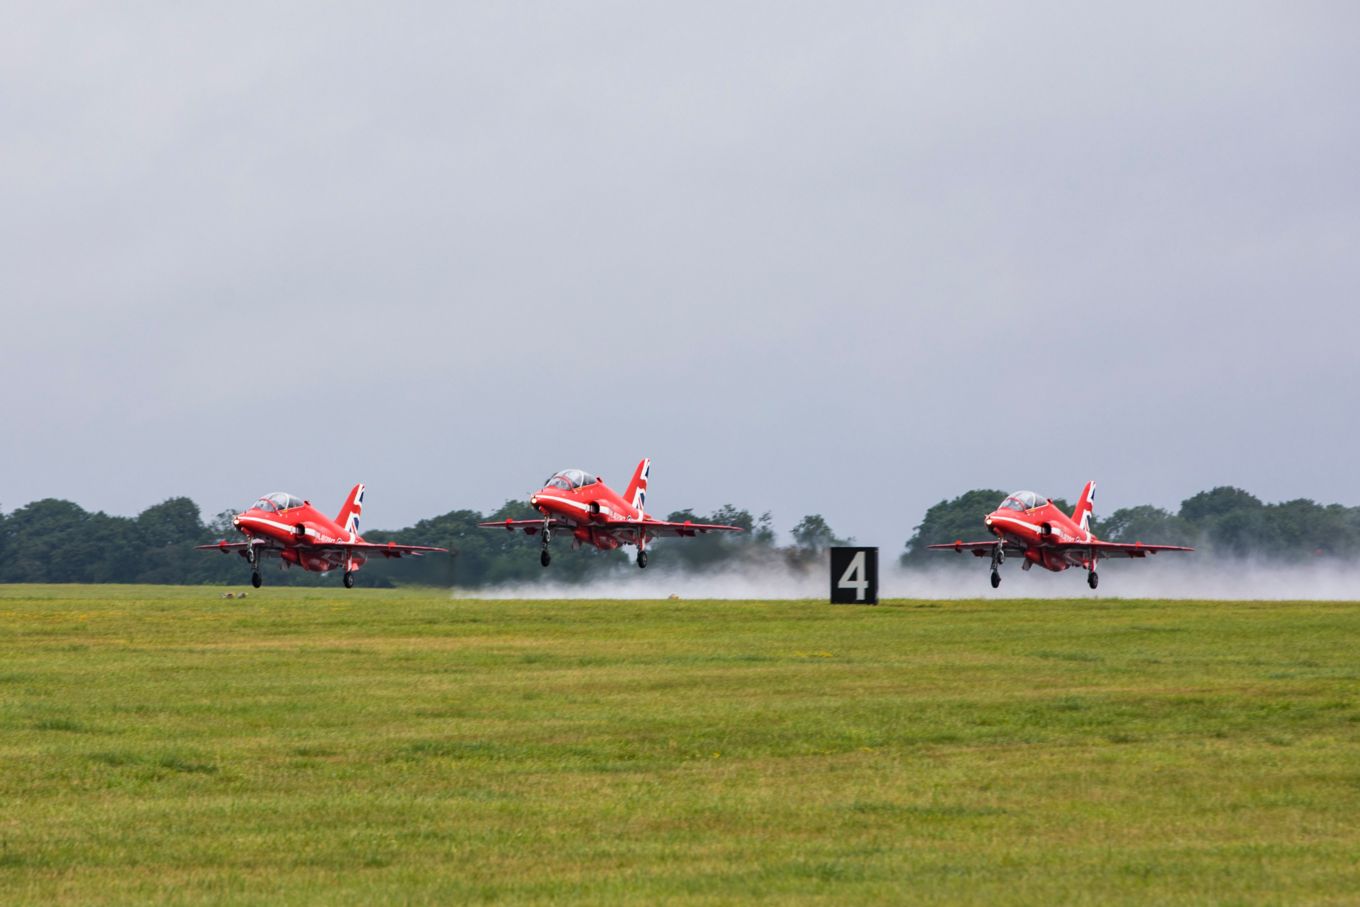 The Red Arrows departing RAF Scampton earlier today.